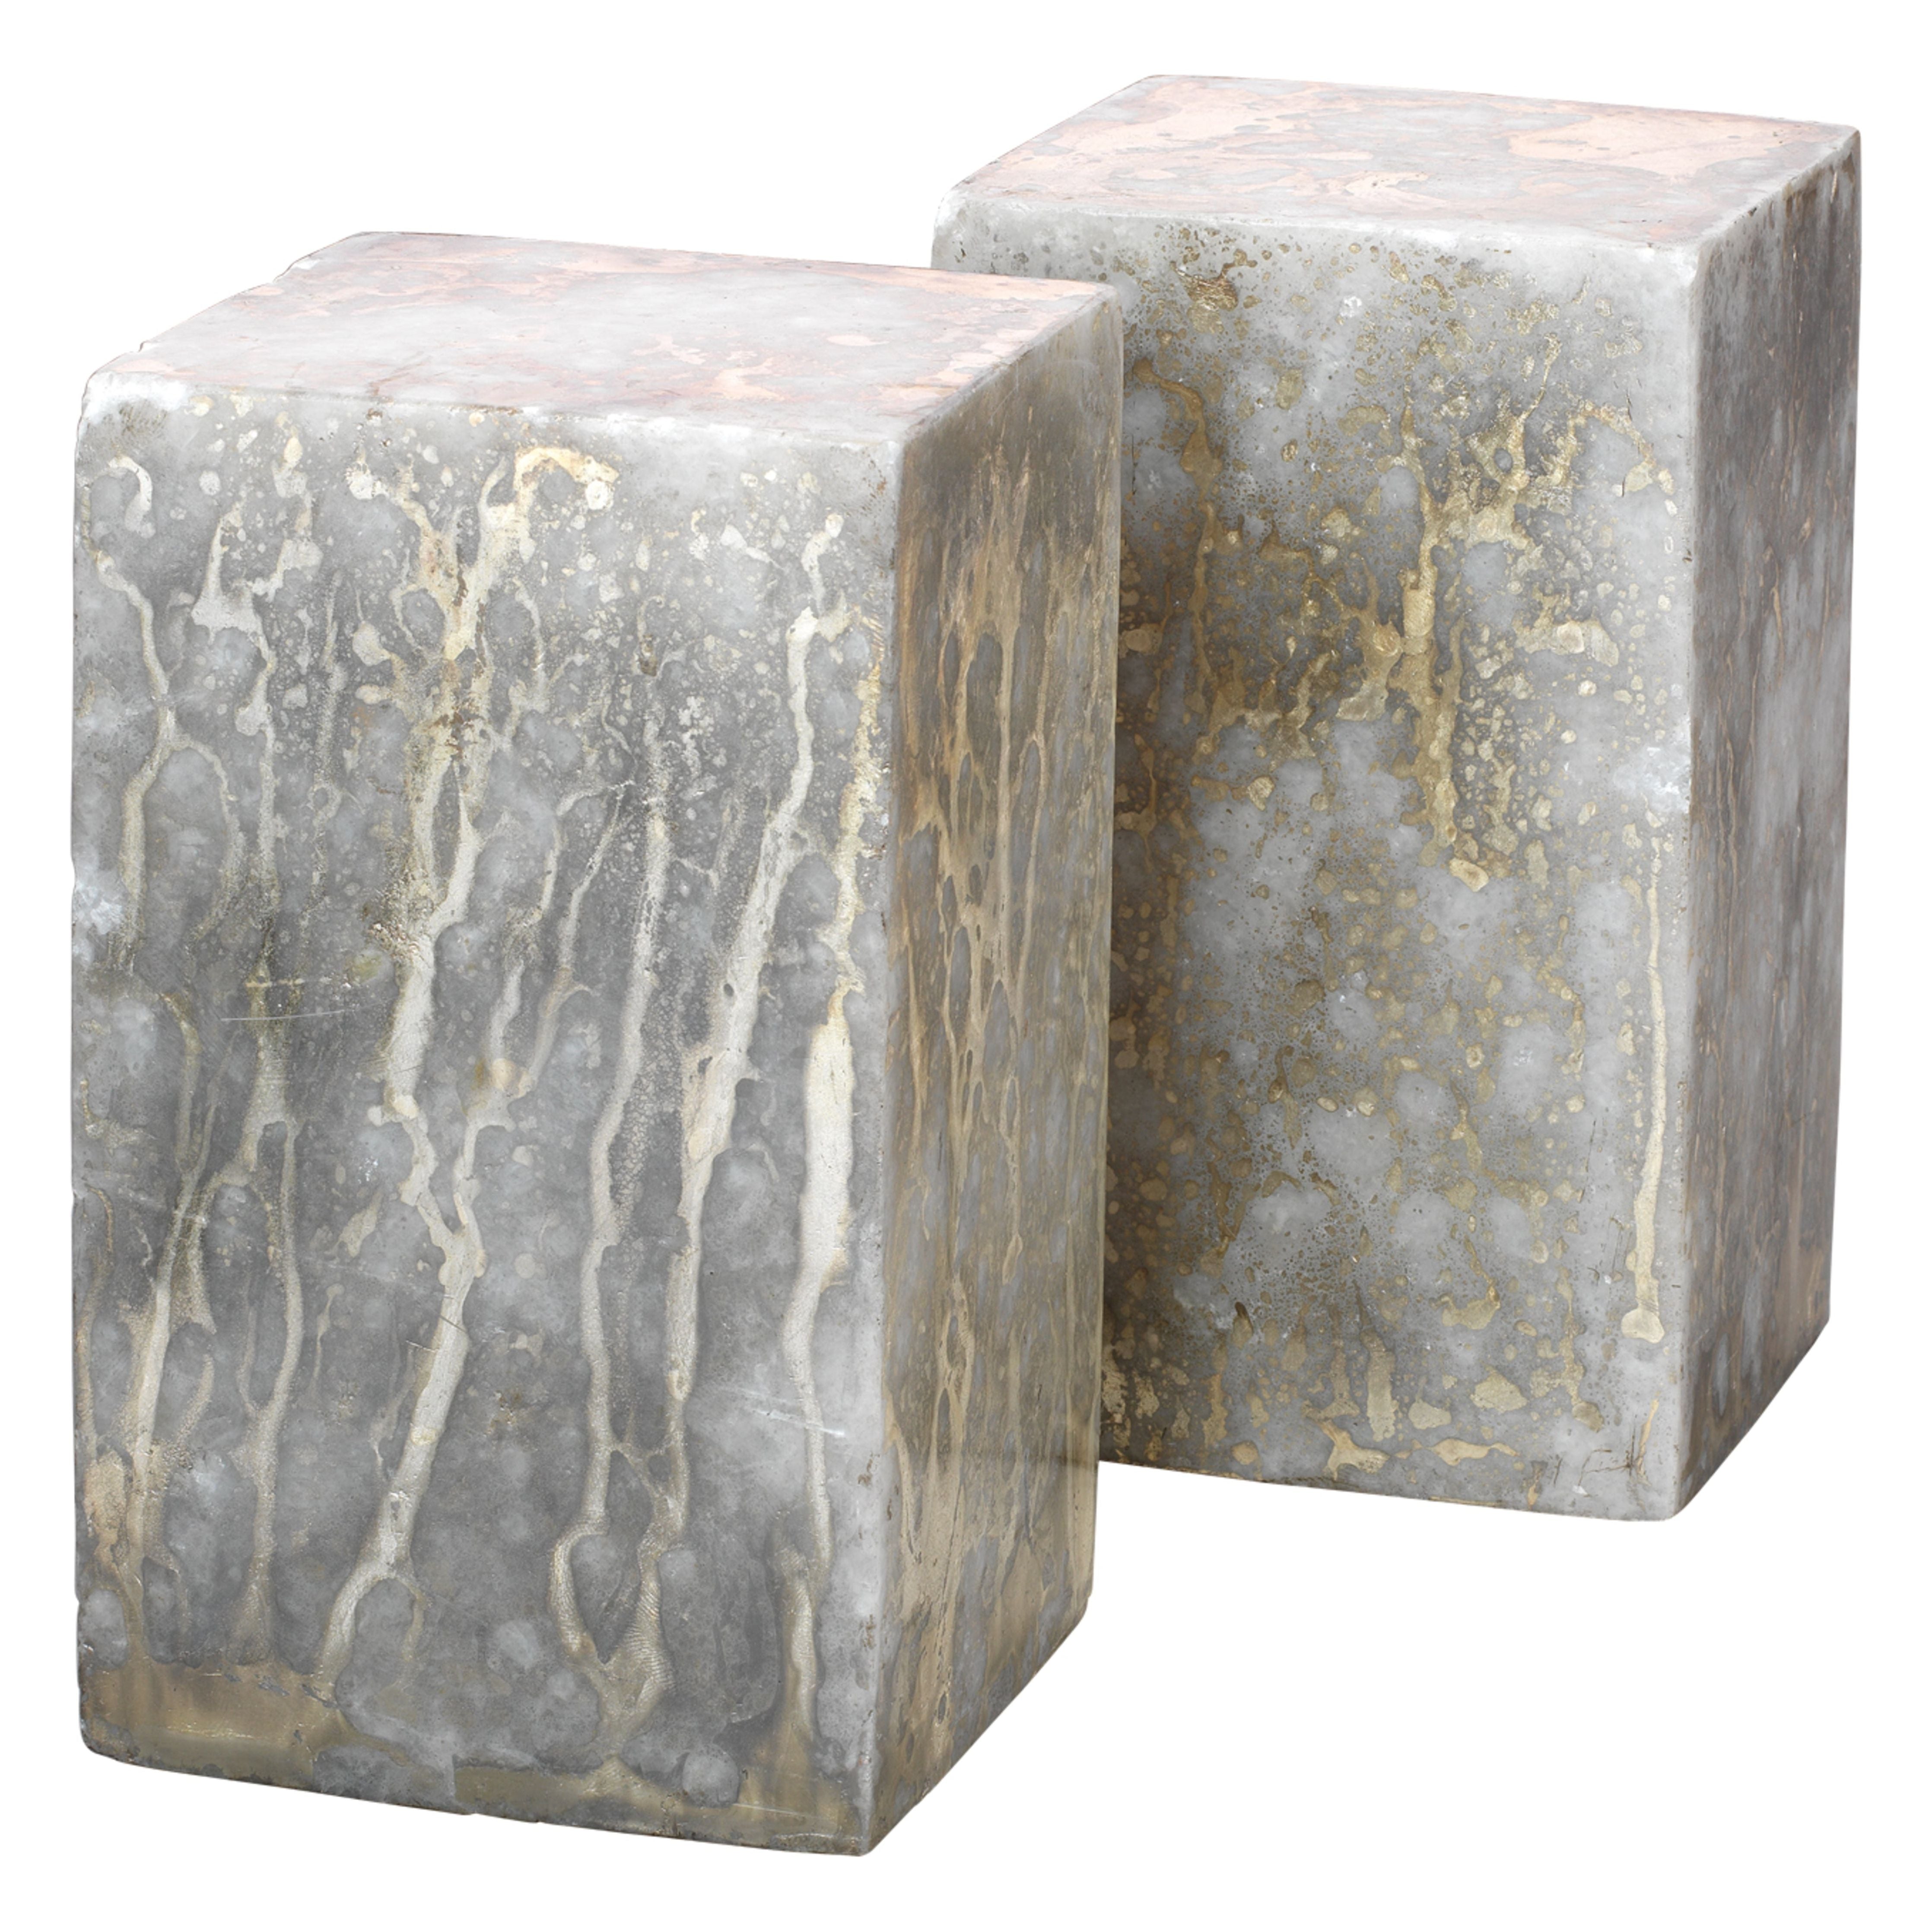 Jamie Young Company - 7SLAB-BESG - Slab Bookends (Set of 2) - Slab - Silver